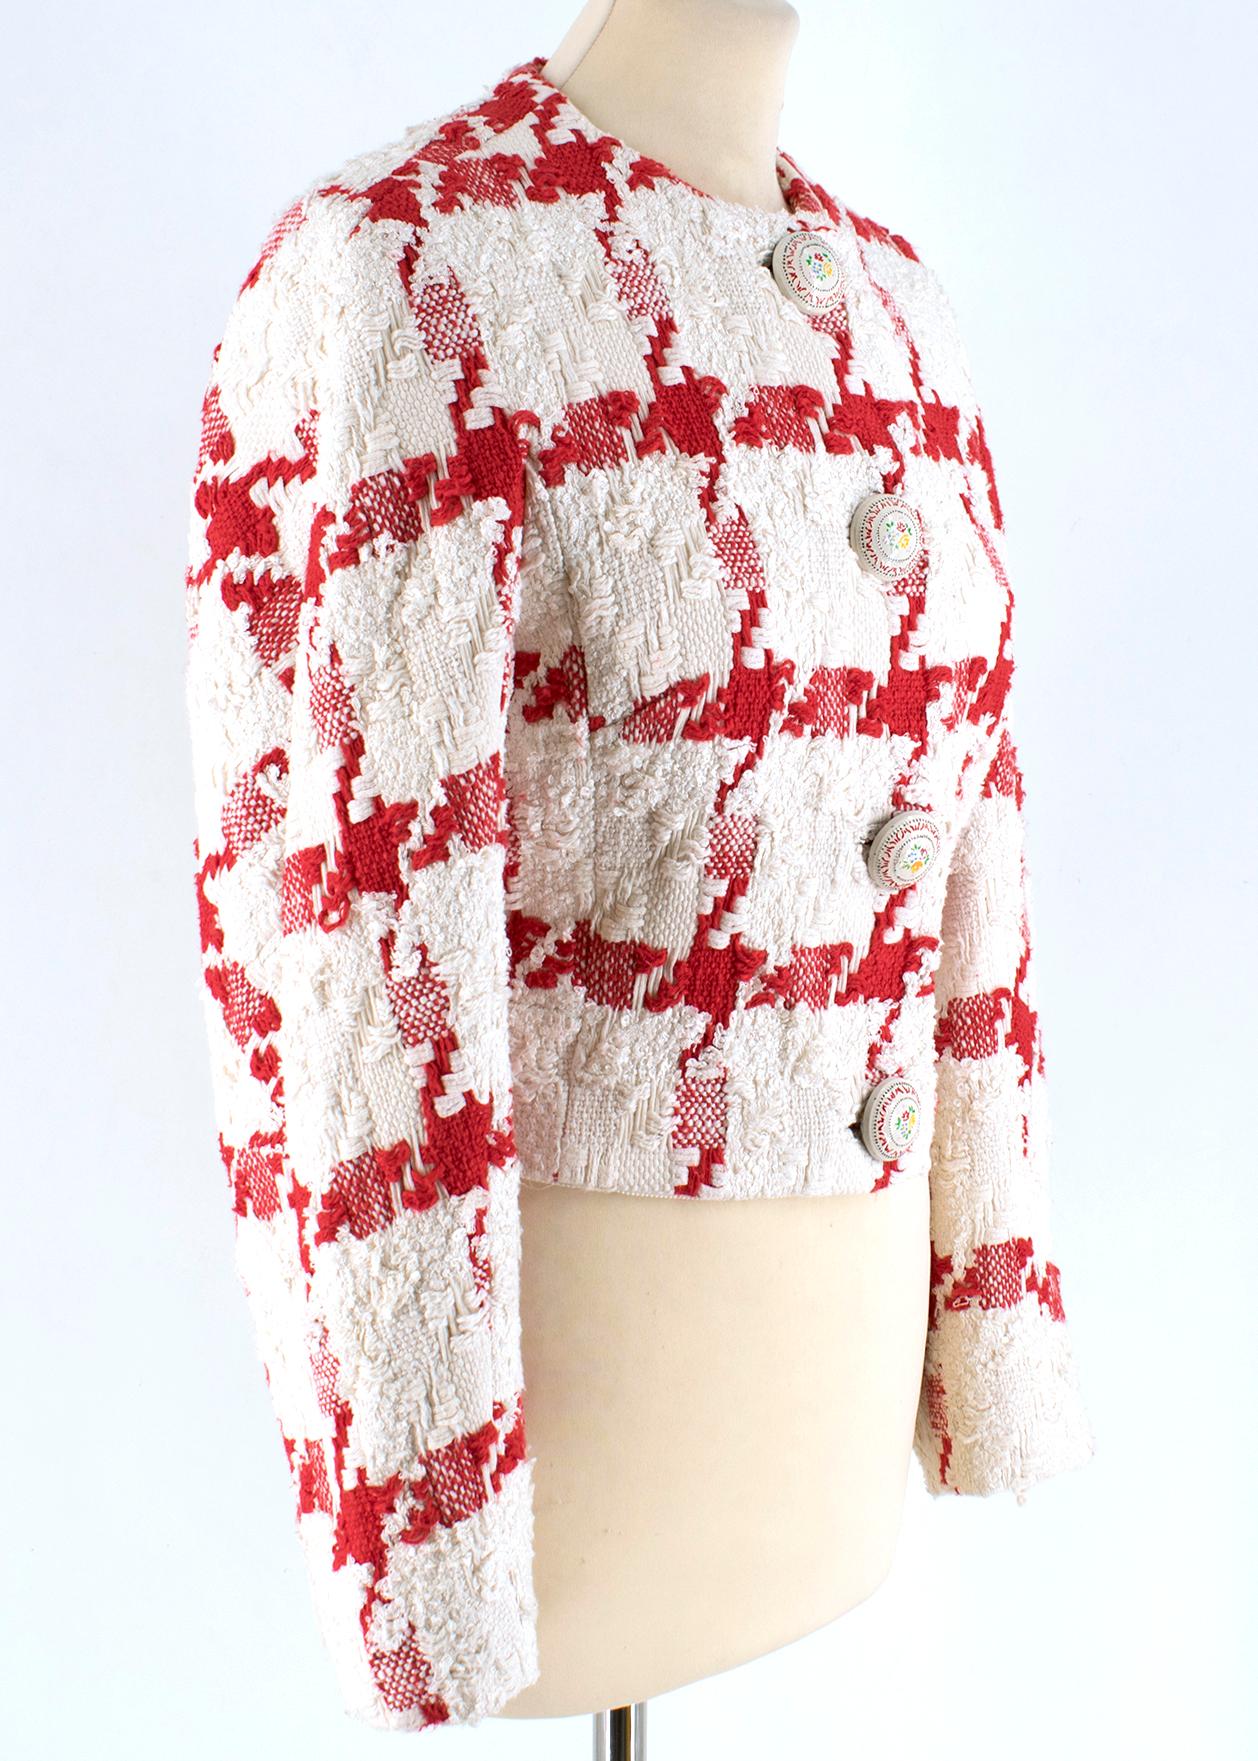 Alexander McQueen Crop Check Tweed Jacket 

Large red stitch pattern design 
Cropped tailored jacket 
Metal floral design button fastenings 
Long sleeve with crew neckline 
Soft cream interior fabric 


Please note, these items are pre-owned and may